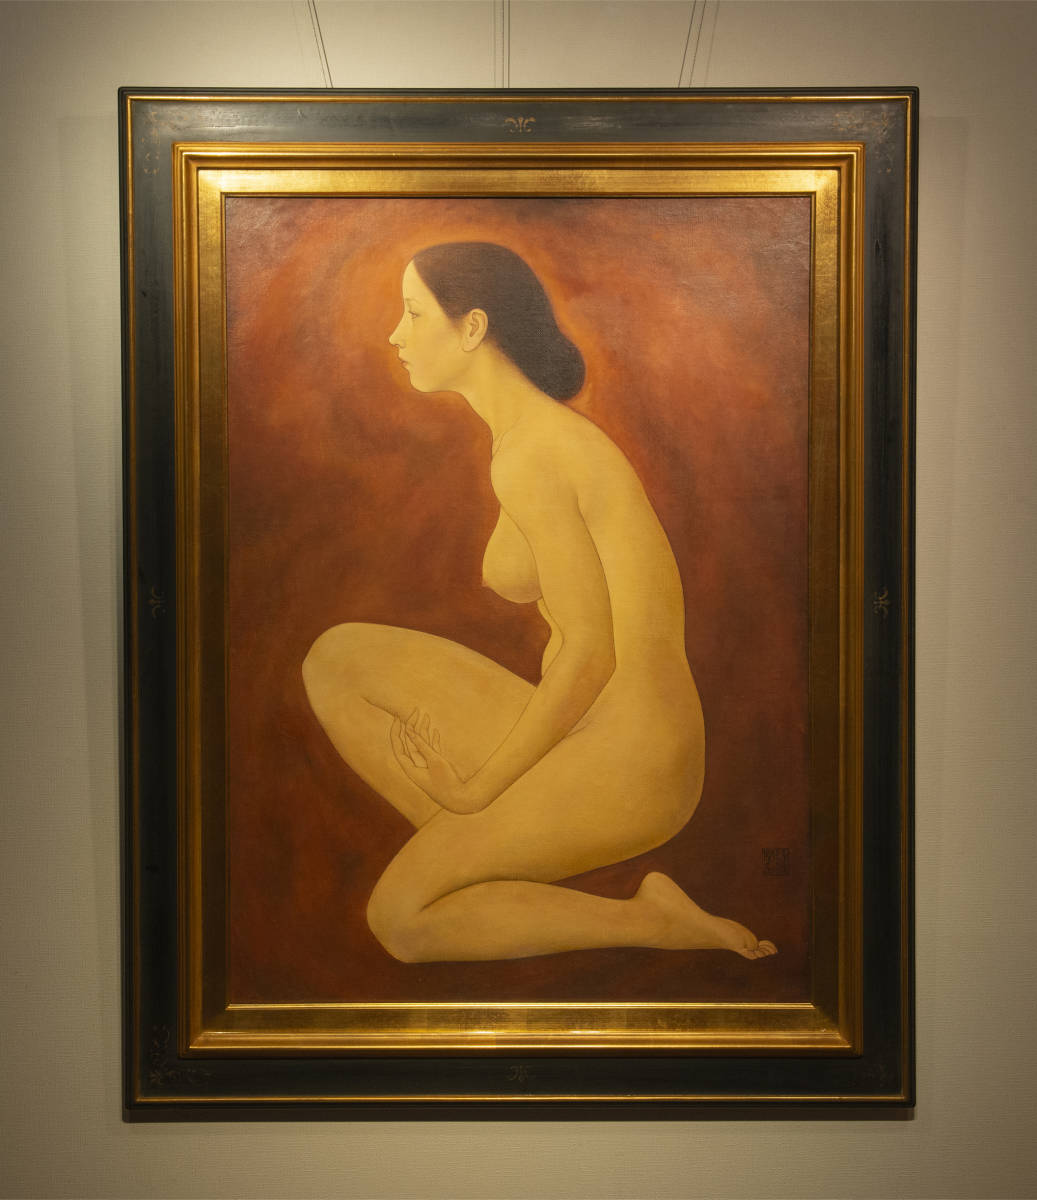 Xue Yanqun, 1987, Kneeling Female Body, exhibited at the China Jiade Exhibition, oil painting, framed, certified authentic, Chinese, painting, contemporary art, Painting, Oil painting, Portraits